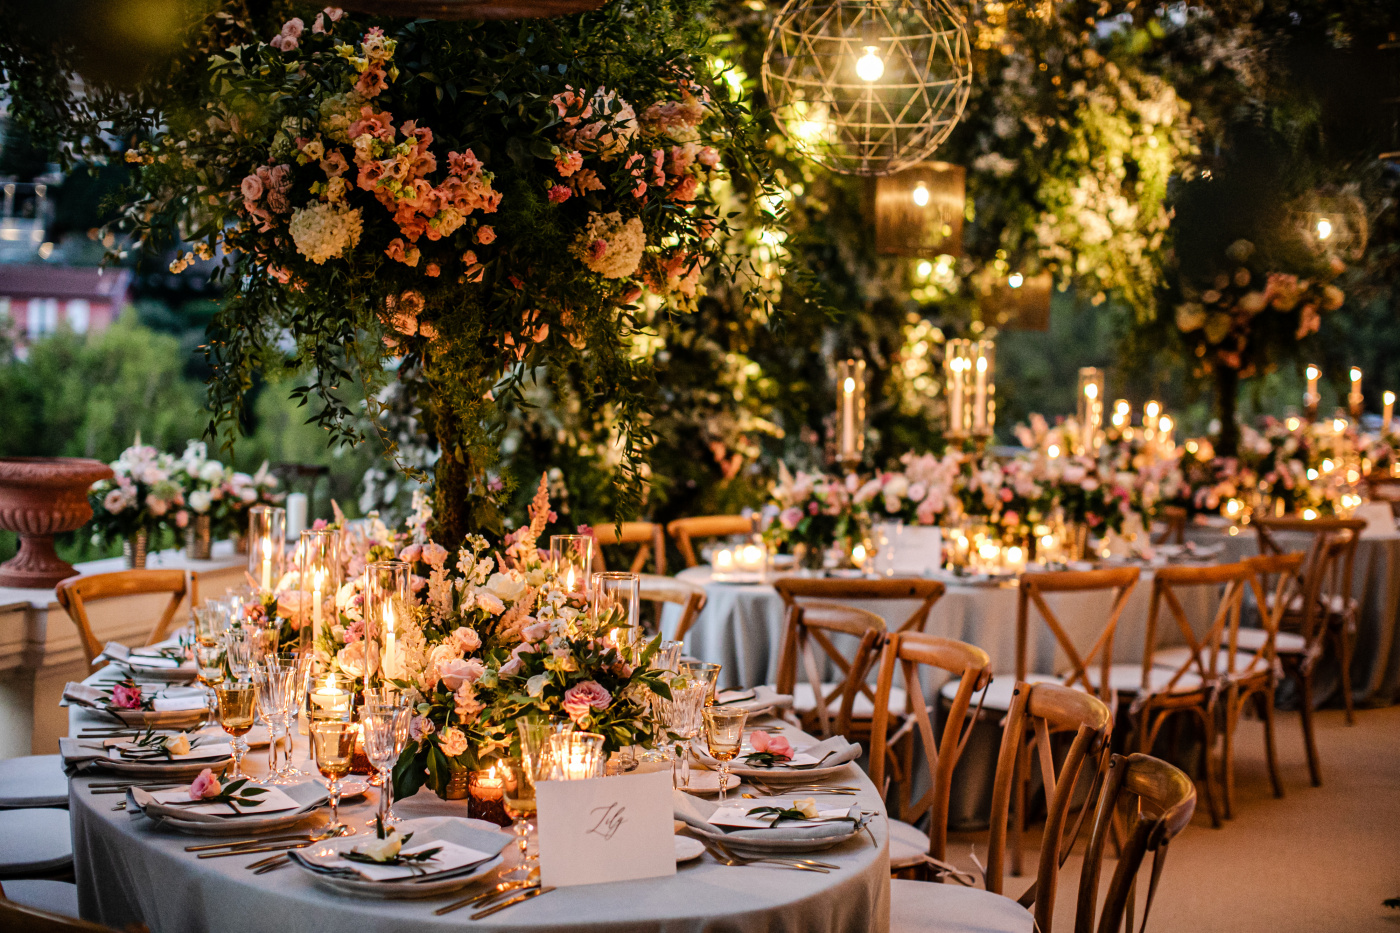 Wedding dinner in Montecarlo with hanging greenery and candles